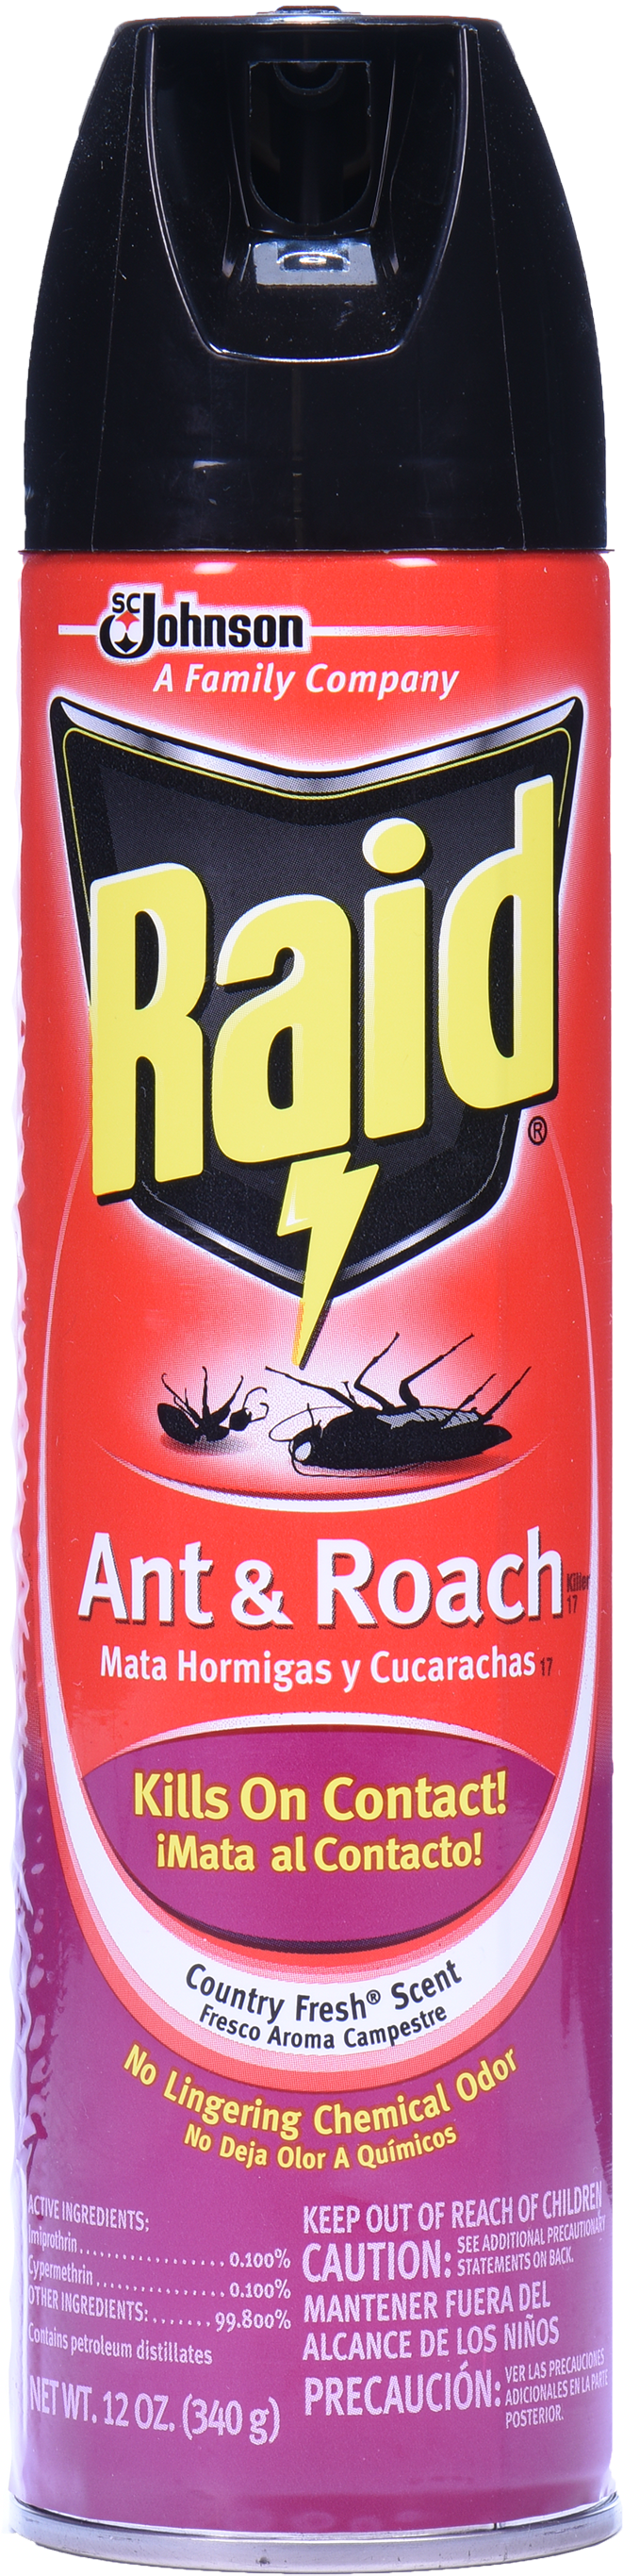 A Red Can With A Label And A Black Insect